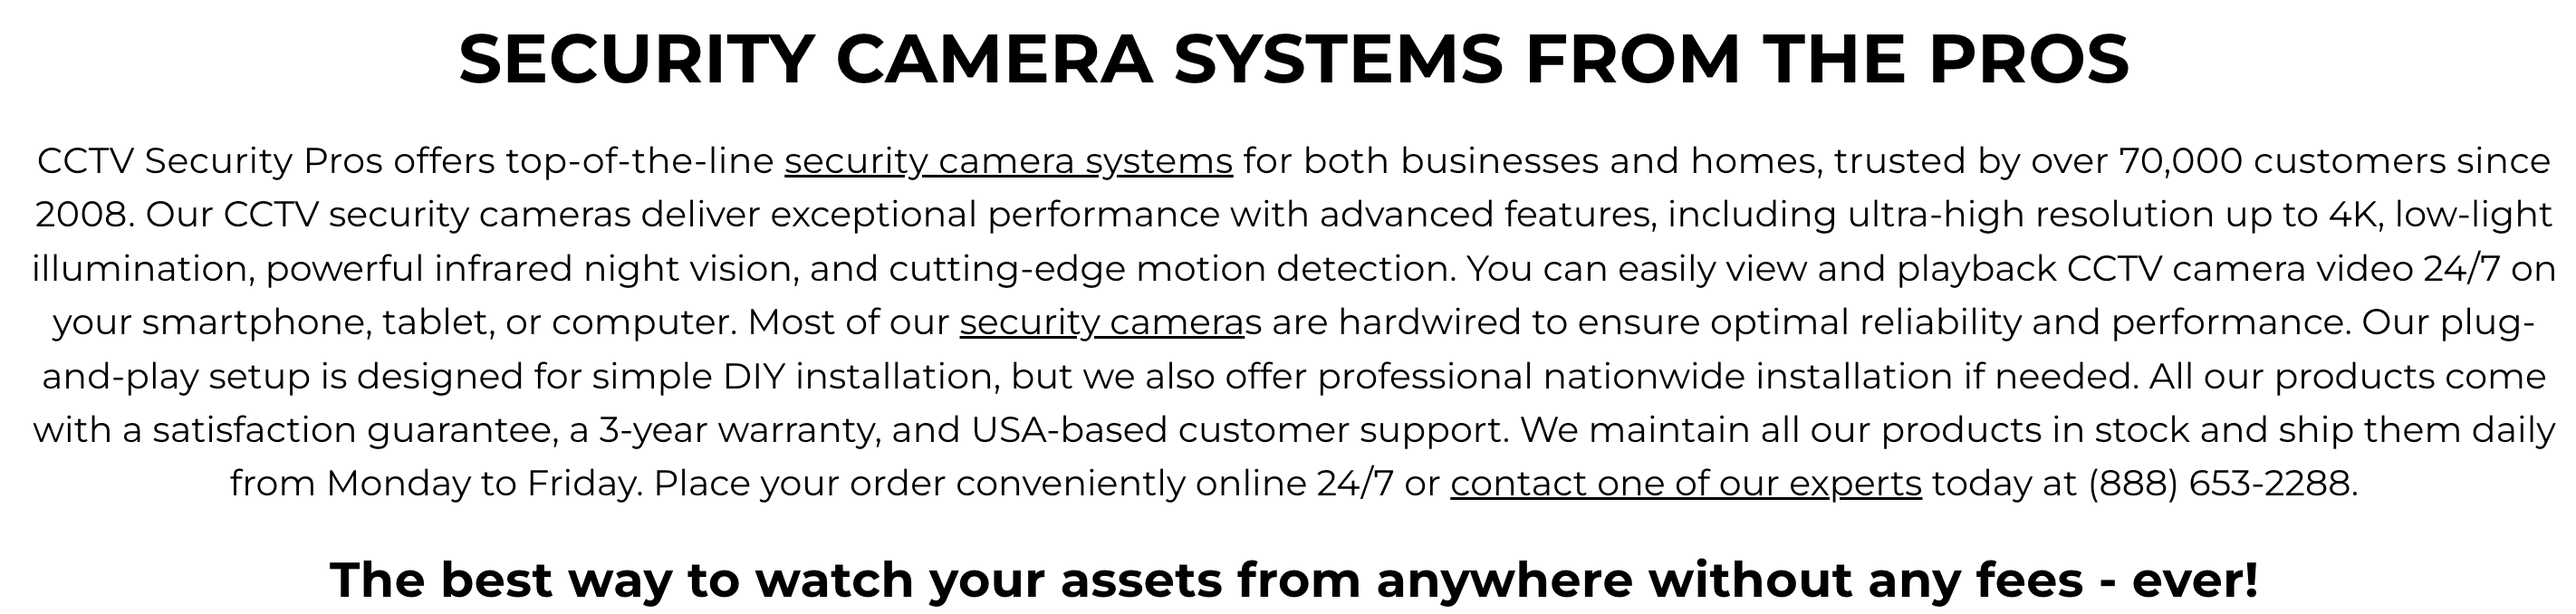 Security Cameras and Systems | CCTV Security Pros